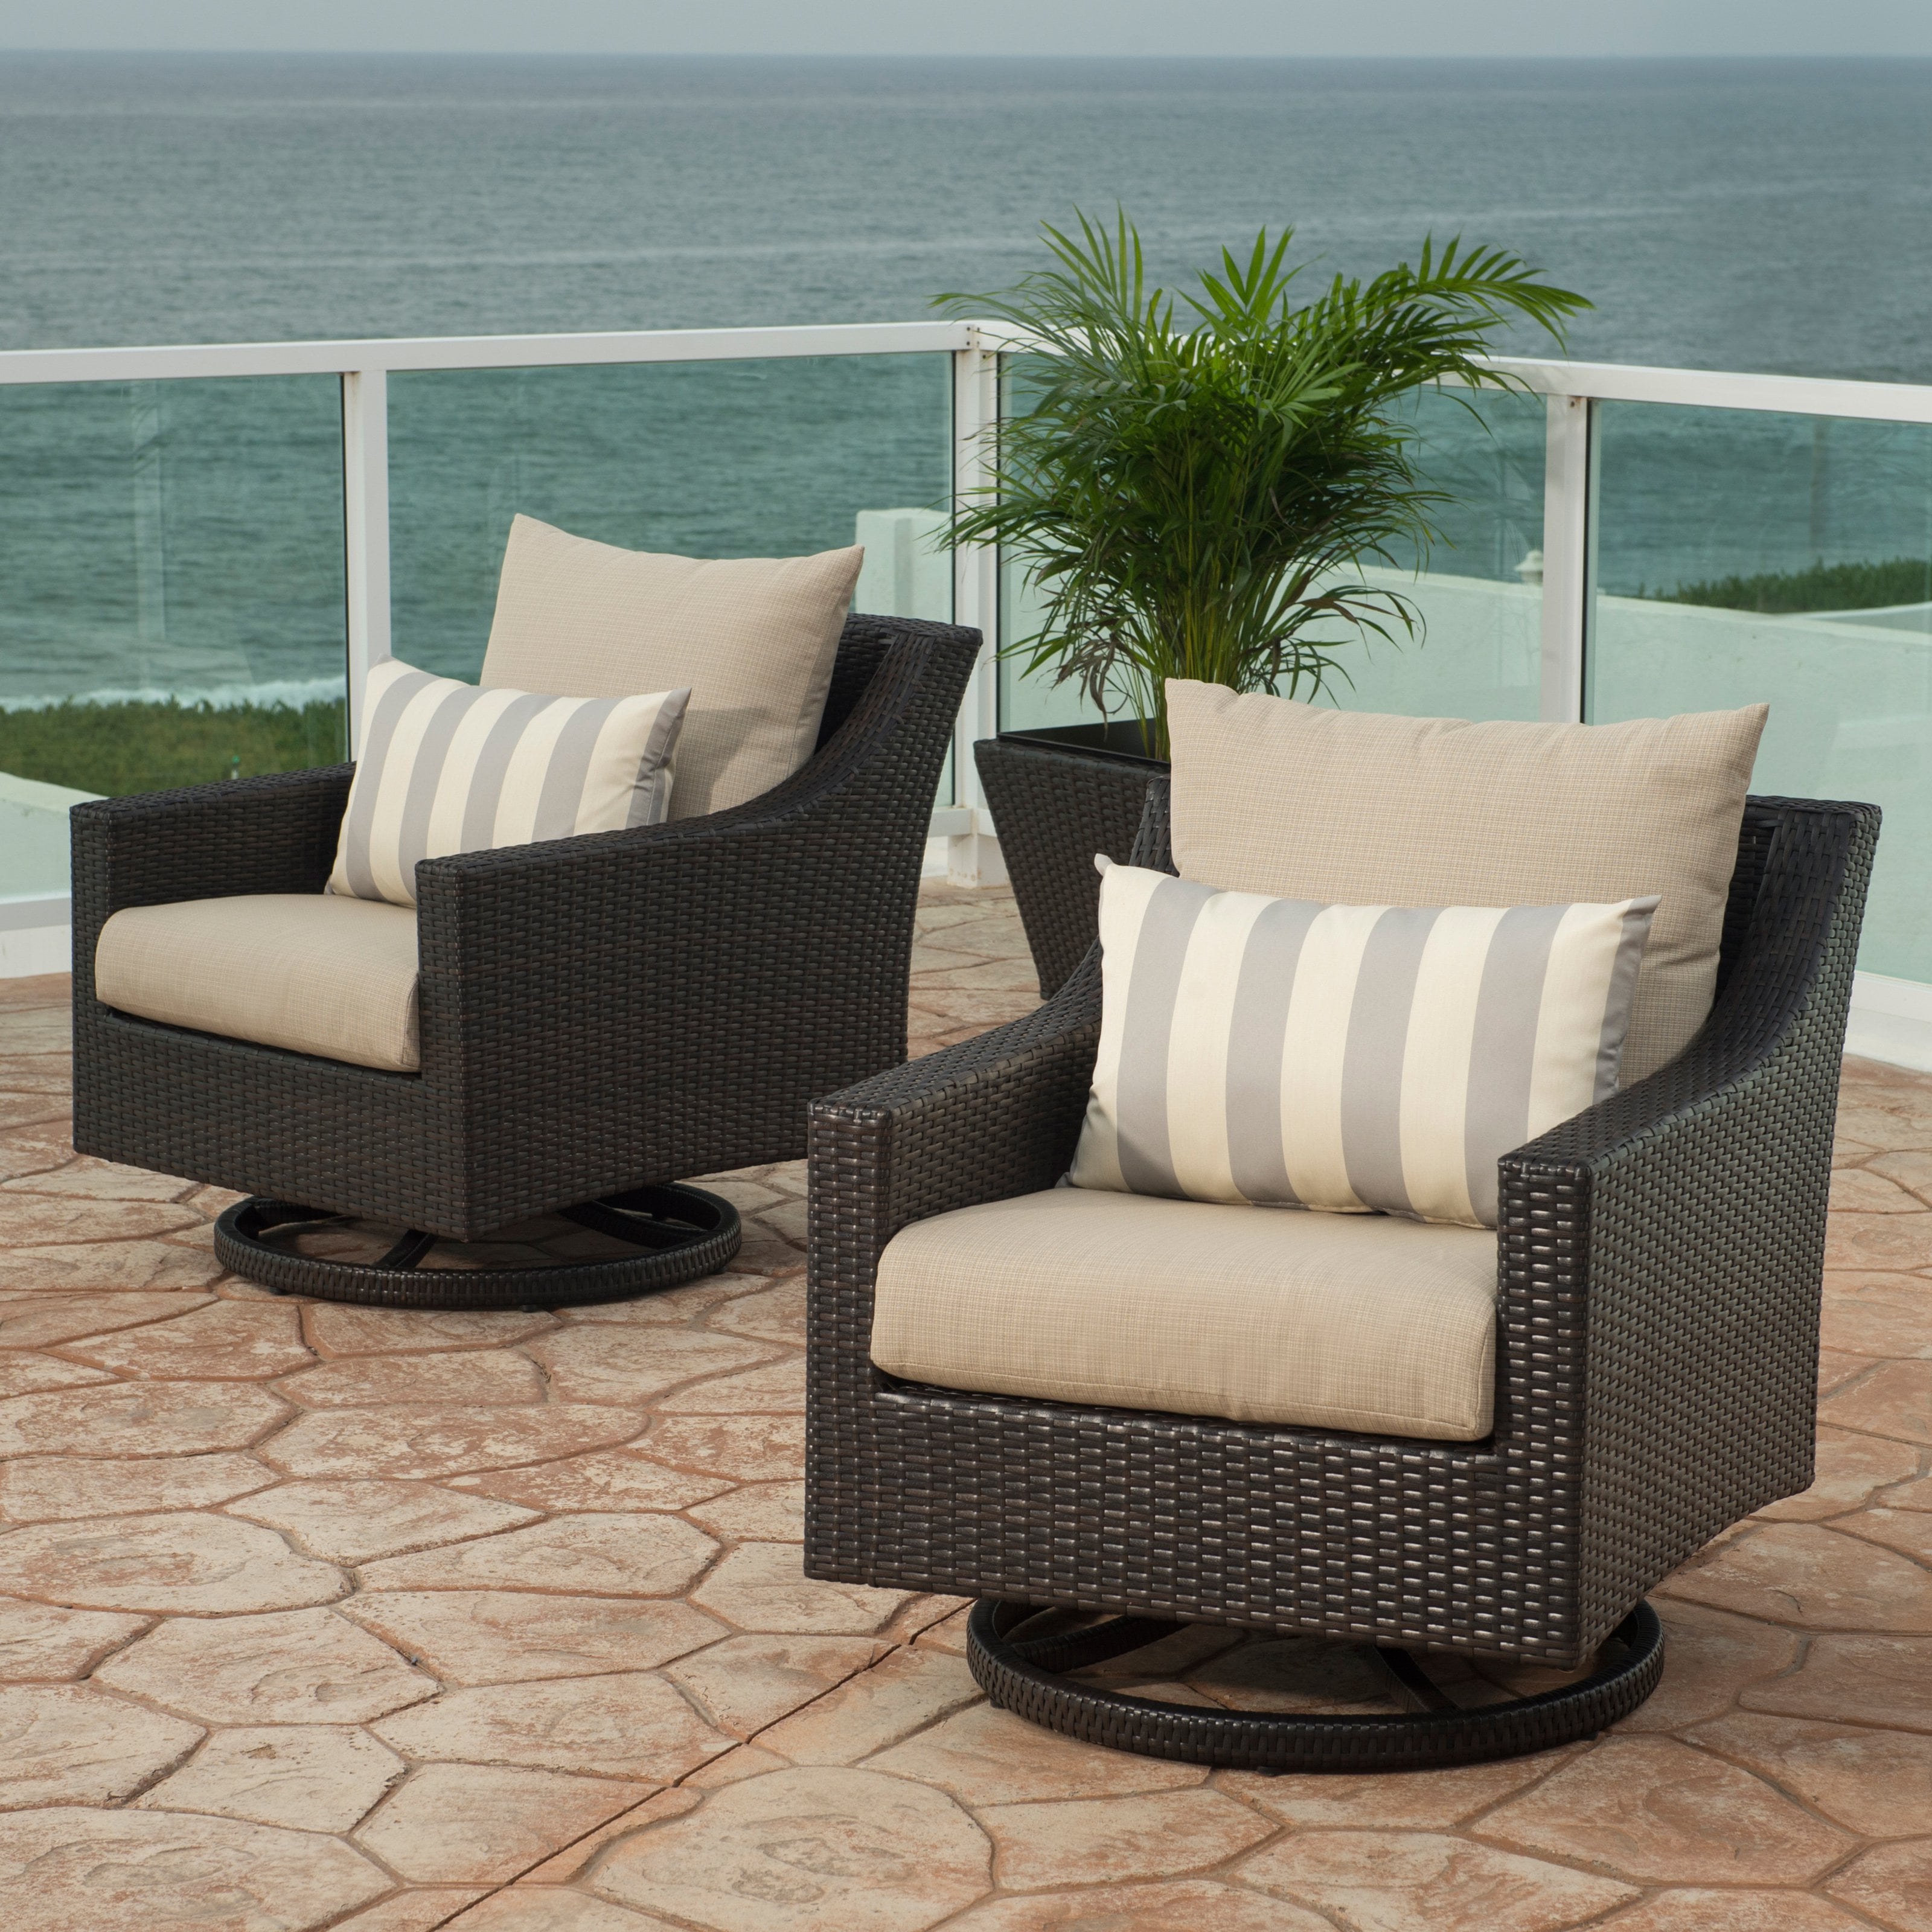 Simple Patio Chairs On Sale Walmart with Simple Decor